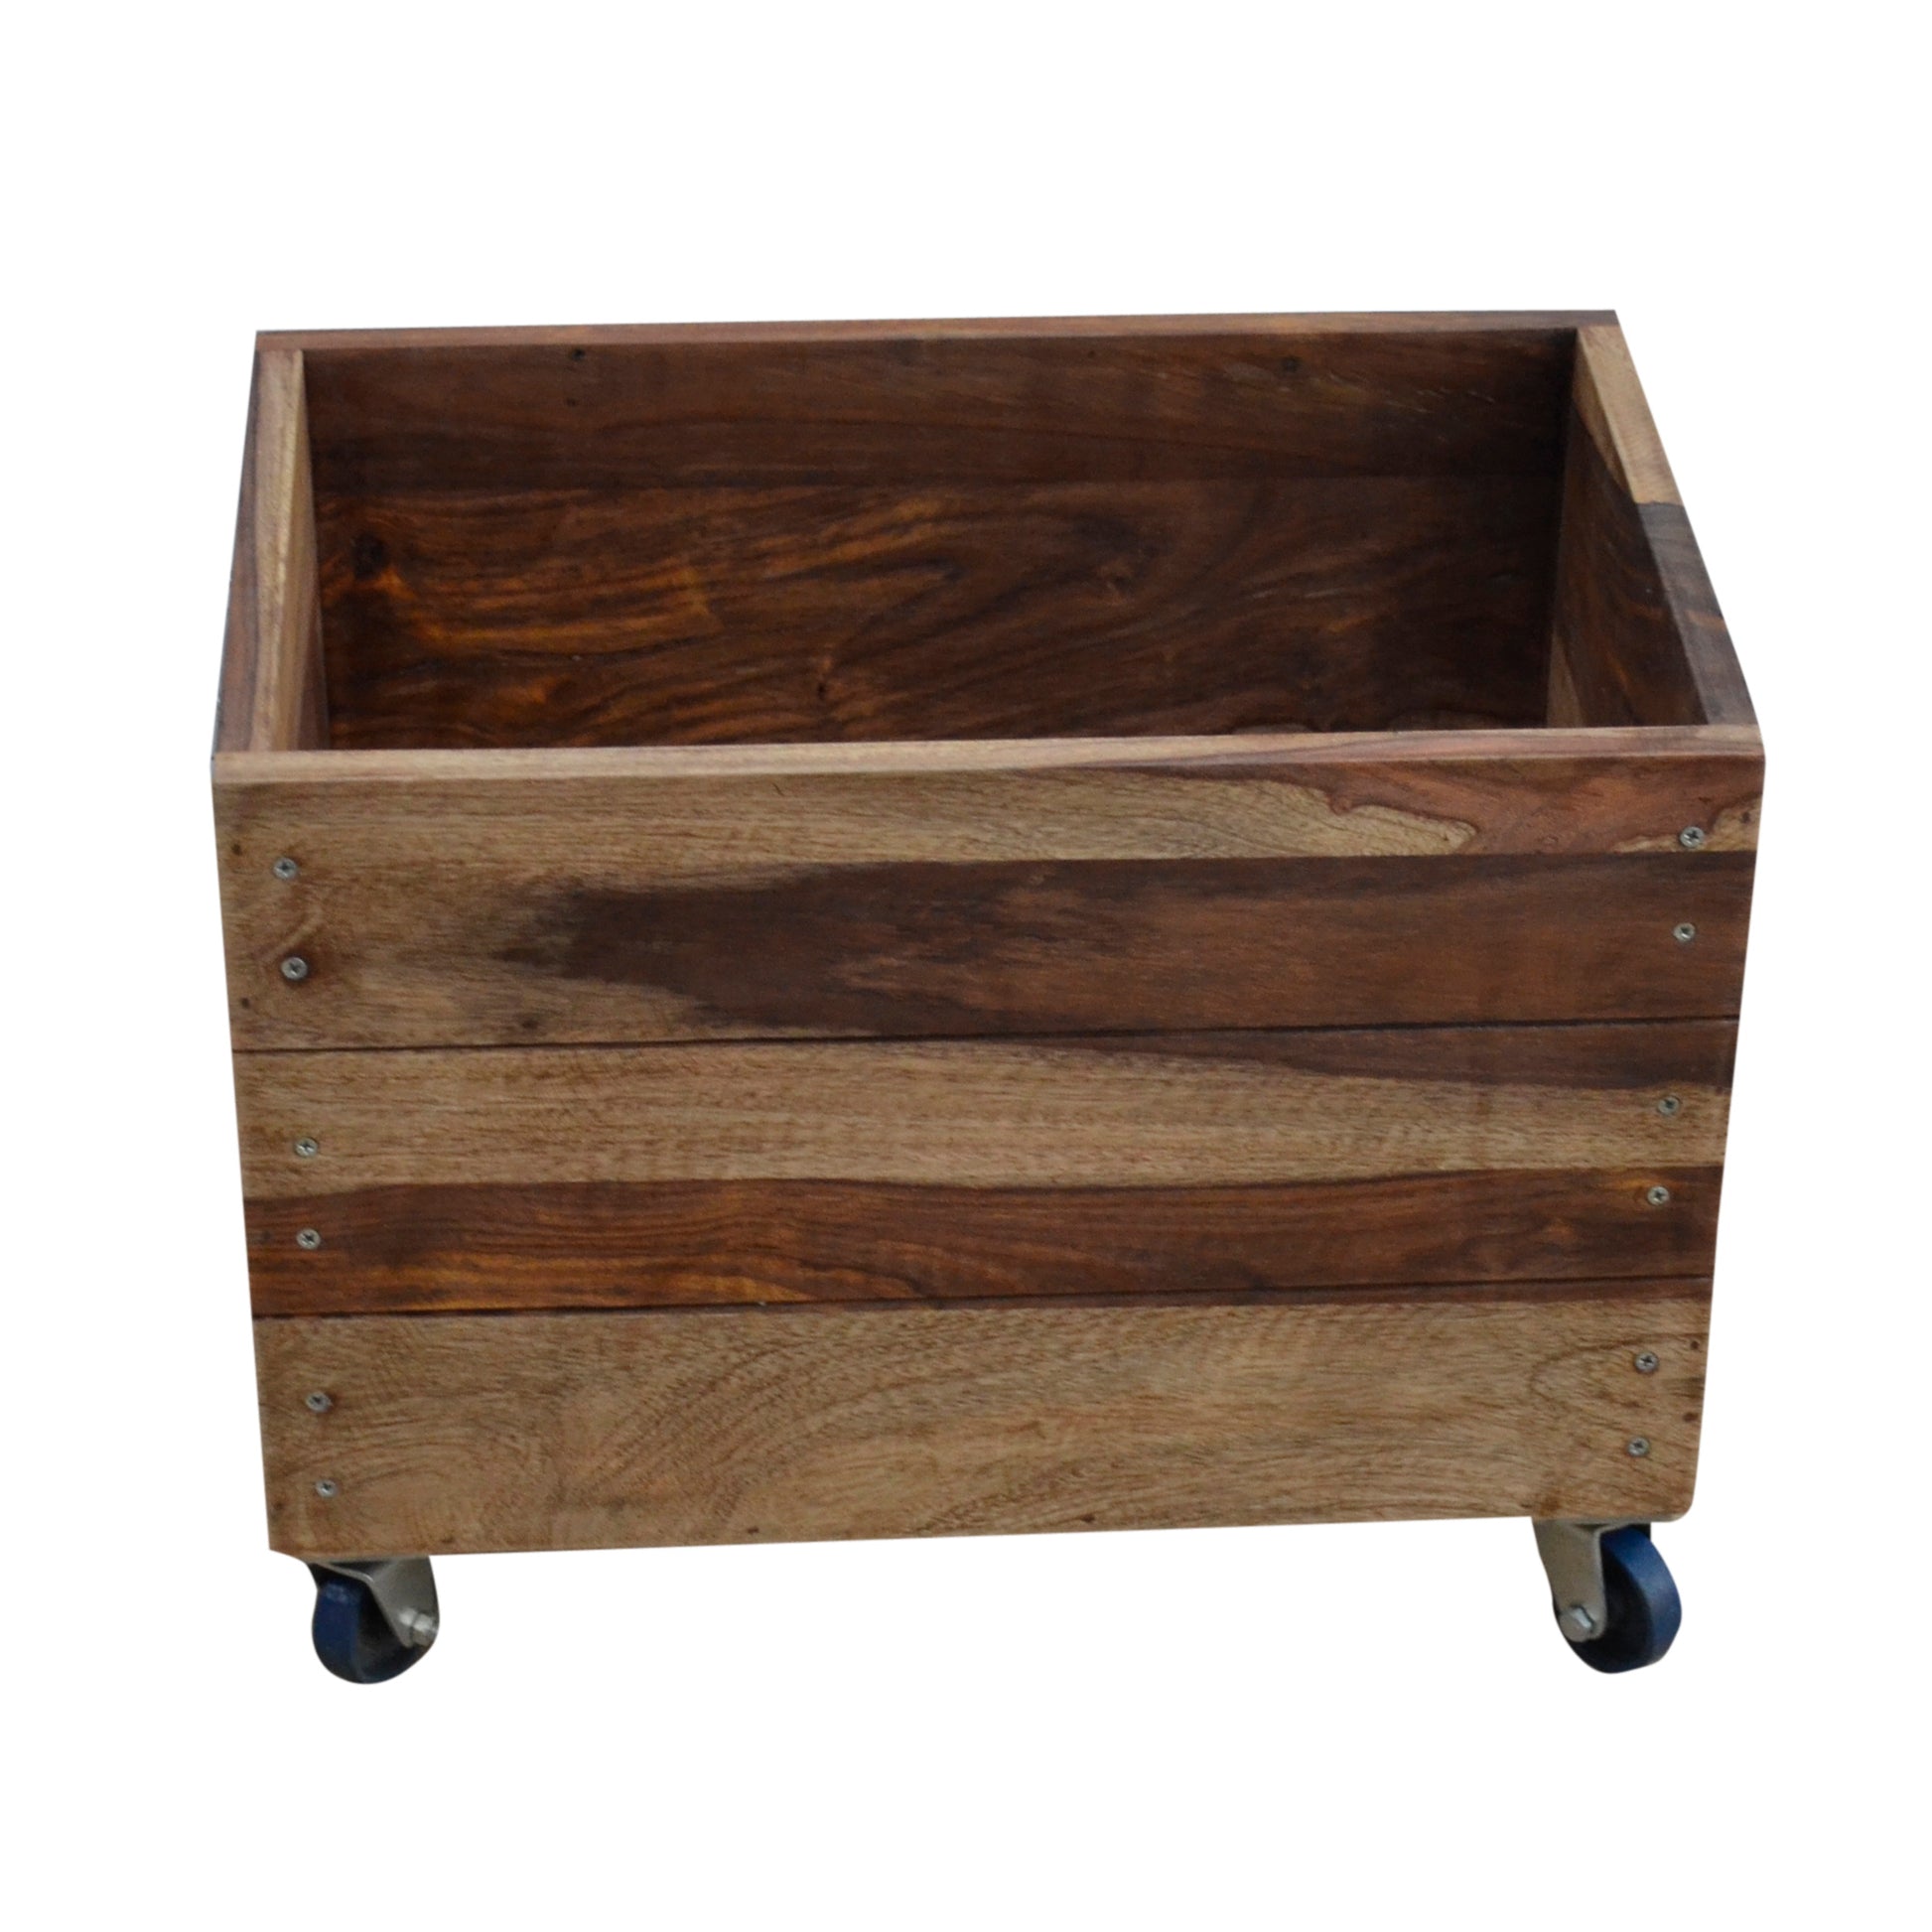 Wheely Recycle Storage Crate - decorstore